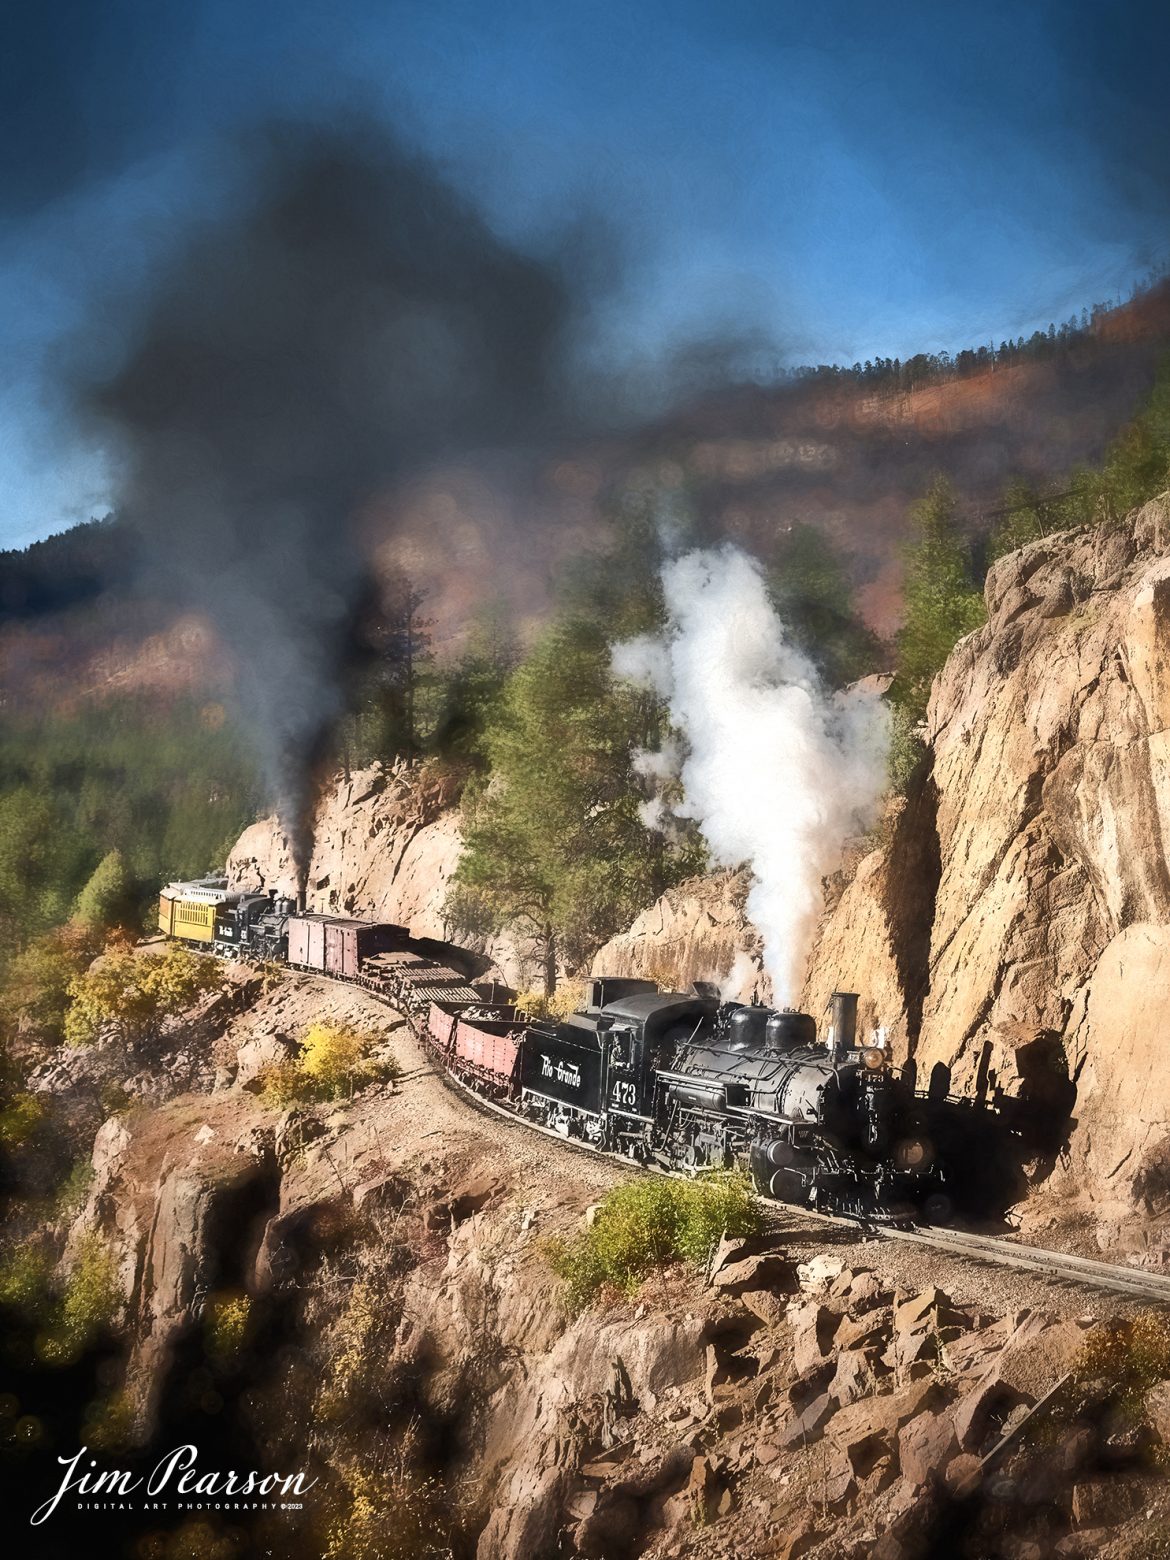 Durango and Silverton Narrow Guage steam locomotive D&RGW 473 pulls a K-28 100th Anniversary Special with D&RGW 476 as a mid-train helper through the Repeating Curves at MP 472.2, along the Animas River, between Durango and Silverton, Colorado, on October 16th, 2023.

According to Wikipedia: The Durango and Silverton Narrow Gauge Railroad, often abbreviated as the D&SNG, is a 3 ft (914 mm) narrow-gauge heritage railroad that operates on 45.2 mi (72.7 km) of track between Durango and Silverton, in the U.S. state of Colorado. The railway is a federally designated National Historic Landmark and was also designated by the American Society of Civil Engineers as a National Historic Civil Engineering Landmark in 1968.

Tech Info: Nikon D810, RAW, Sigma 24-70 @ 24mm, f/5.6, 1/640, ISO 160.

railroad, railroads train, trains, best photo. sold photo, railway, railway, sold train photos, sold train pictures, steam trains, rail transport, railroad engines, pictures of trains, pictures of railways, best train photograph, best photo, photography of trains, steam, train photography, sold picture, best sold picture, Jim Pearson Photography, Durango and Silverton Narrow Guage Railroad, steam train, DRGWRR